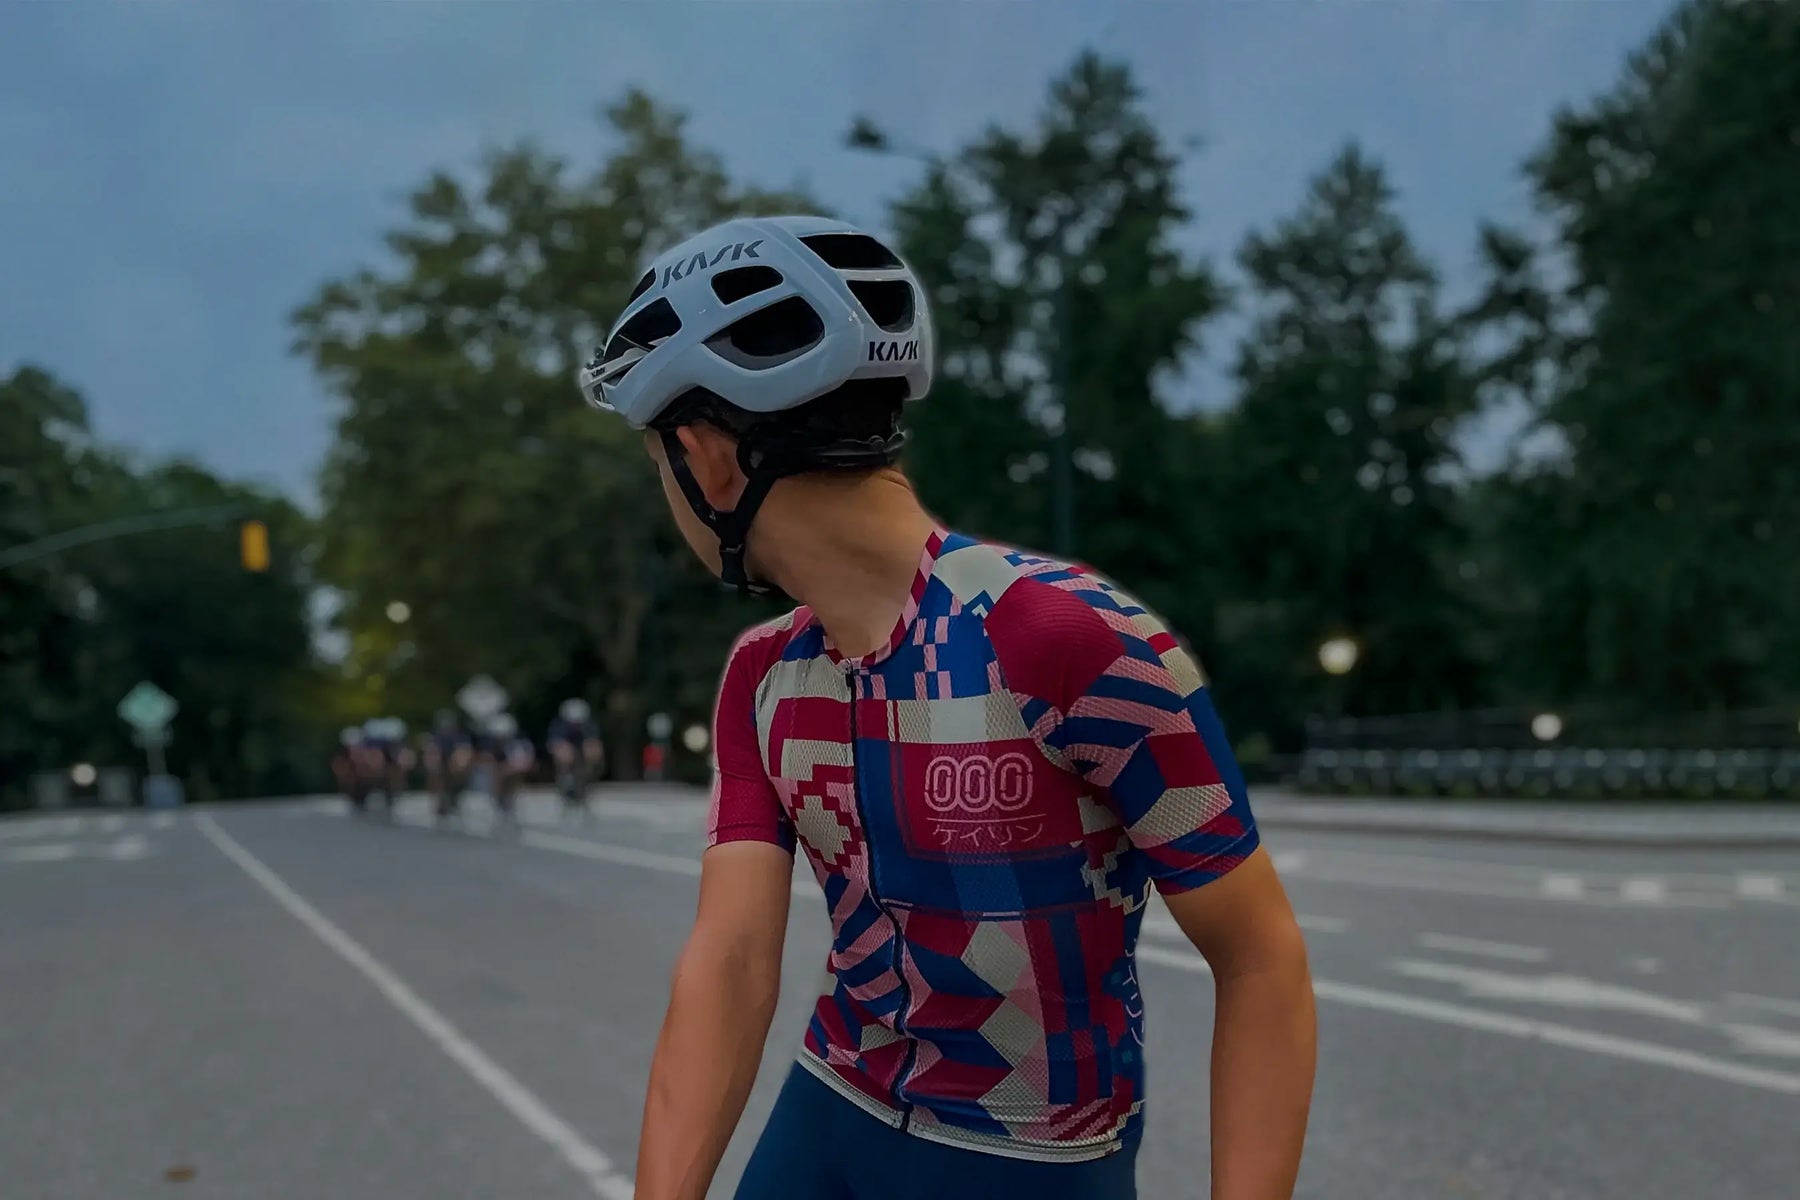 Male cyclist wearing the red Keirin mesh jersey from Ostroy and the Ostroy Nomad team bib in blue